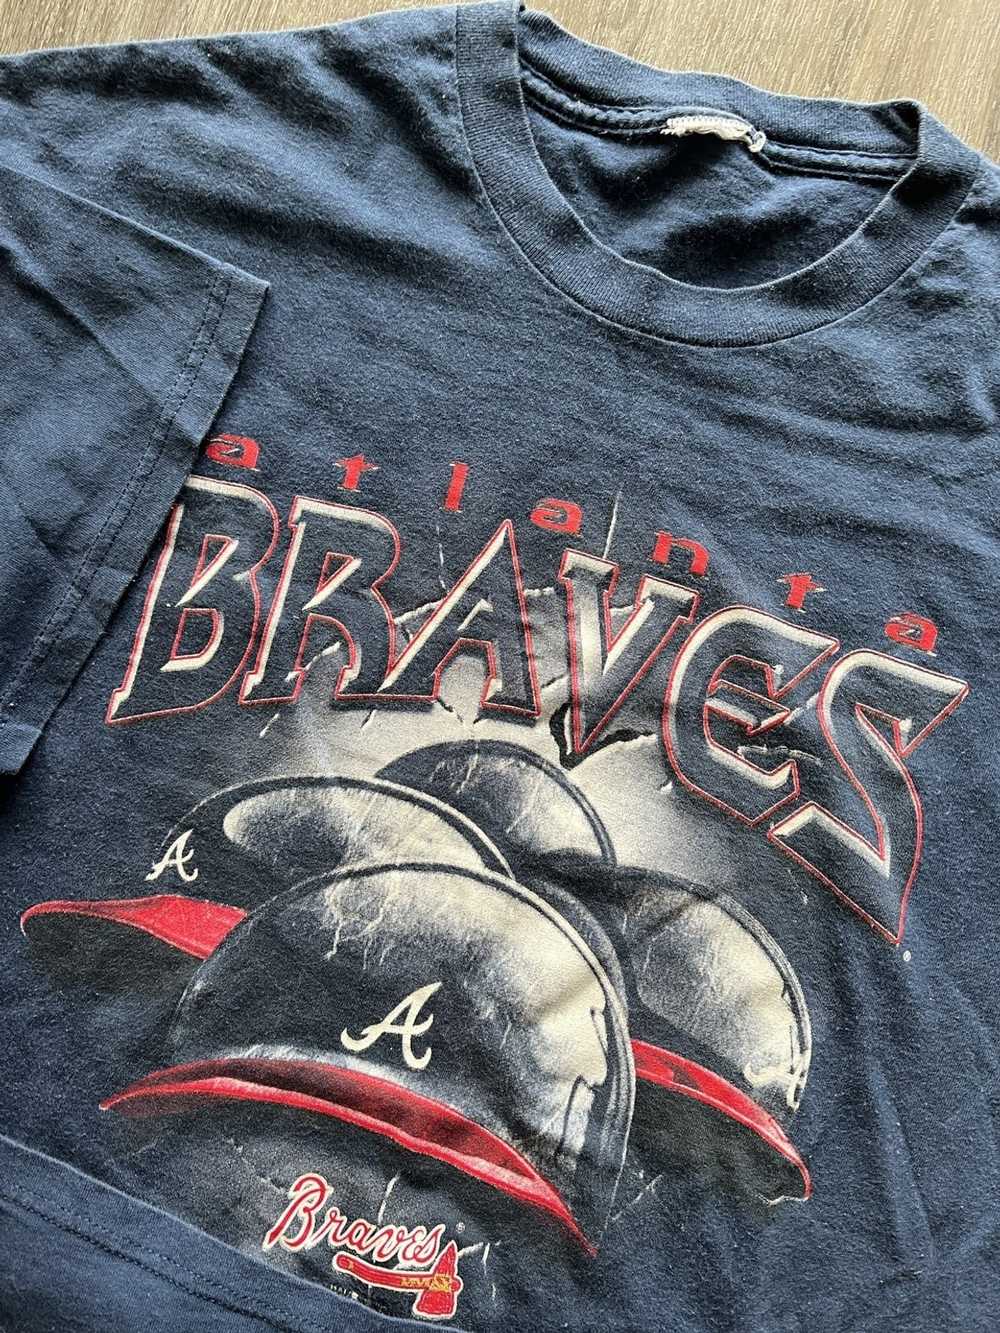 MLB x Grateful Dead x Braves T-Shirt from Homage. | Navy | Vintage Apparel from Homage.